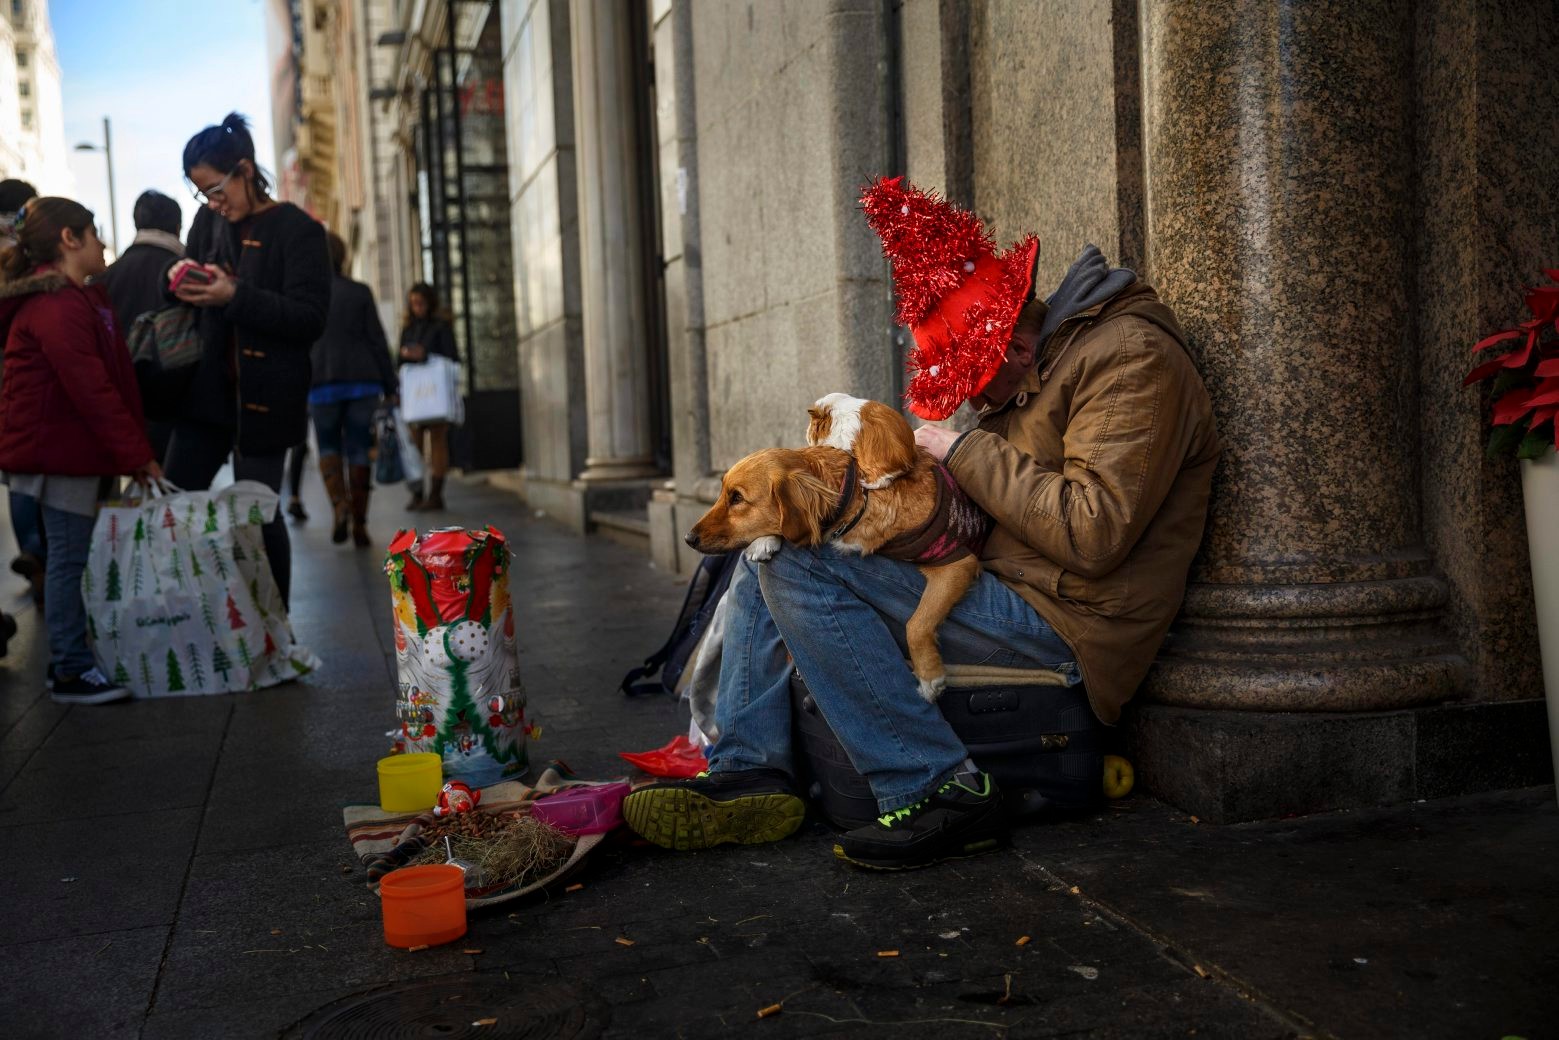 A man sleeps while begging with a dog and a Guinea pig on his knees in central Madrid, Wednesday, Dec. 9, 2015. (AP Photo/Daniel Ochoa de Olza) Spain Daily Life